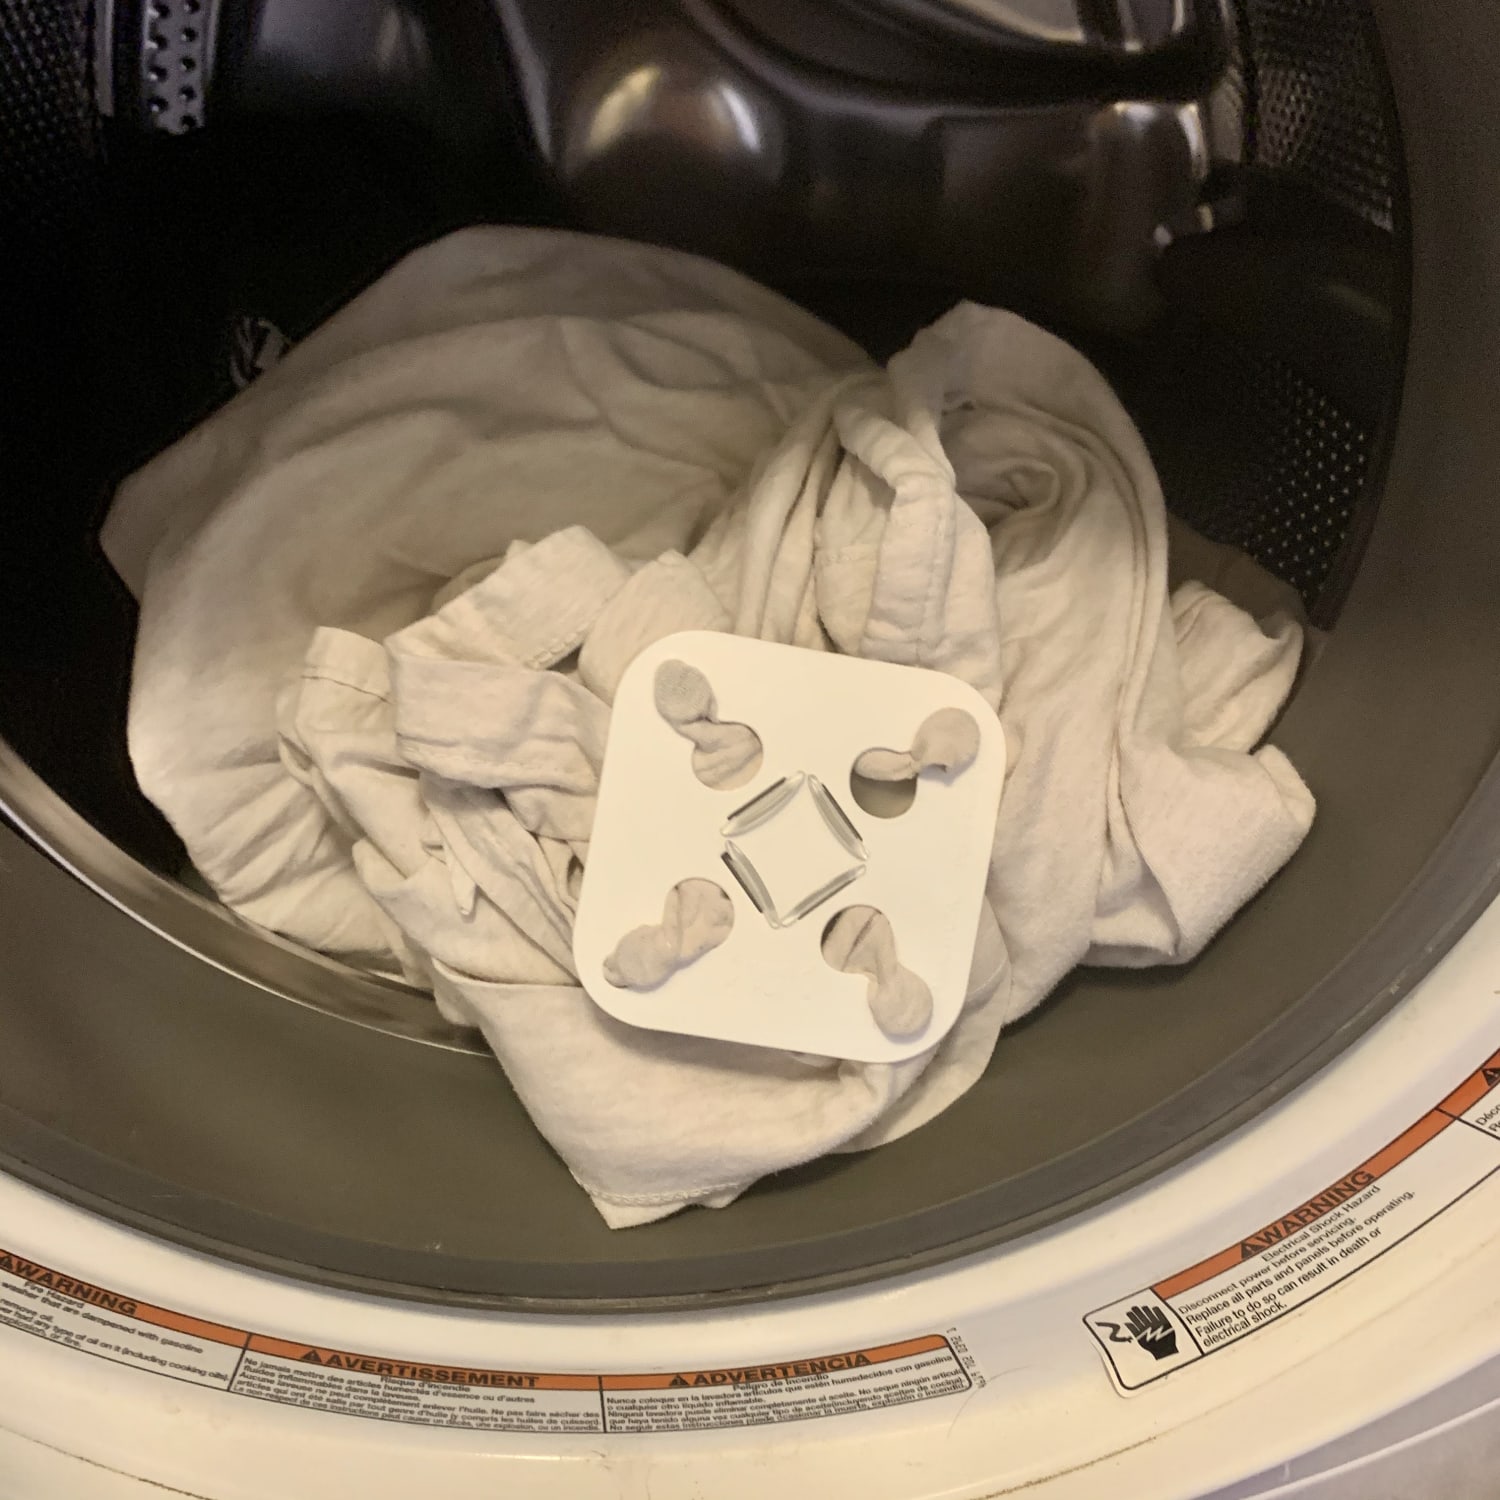 Wad-Free for Bed Sheets is the ultimate washer and dryer hack